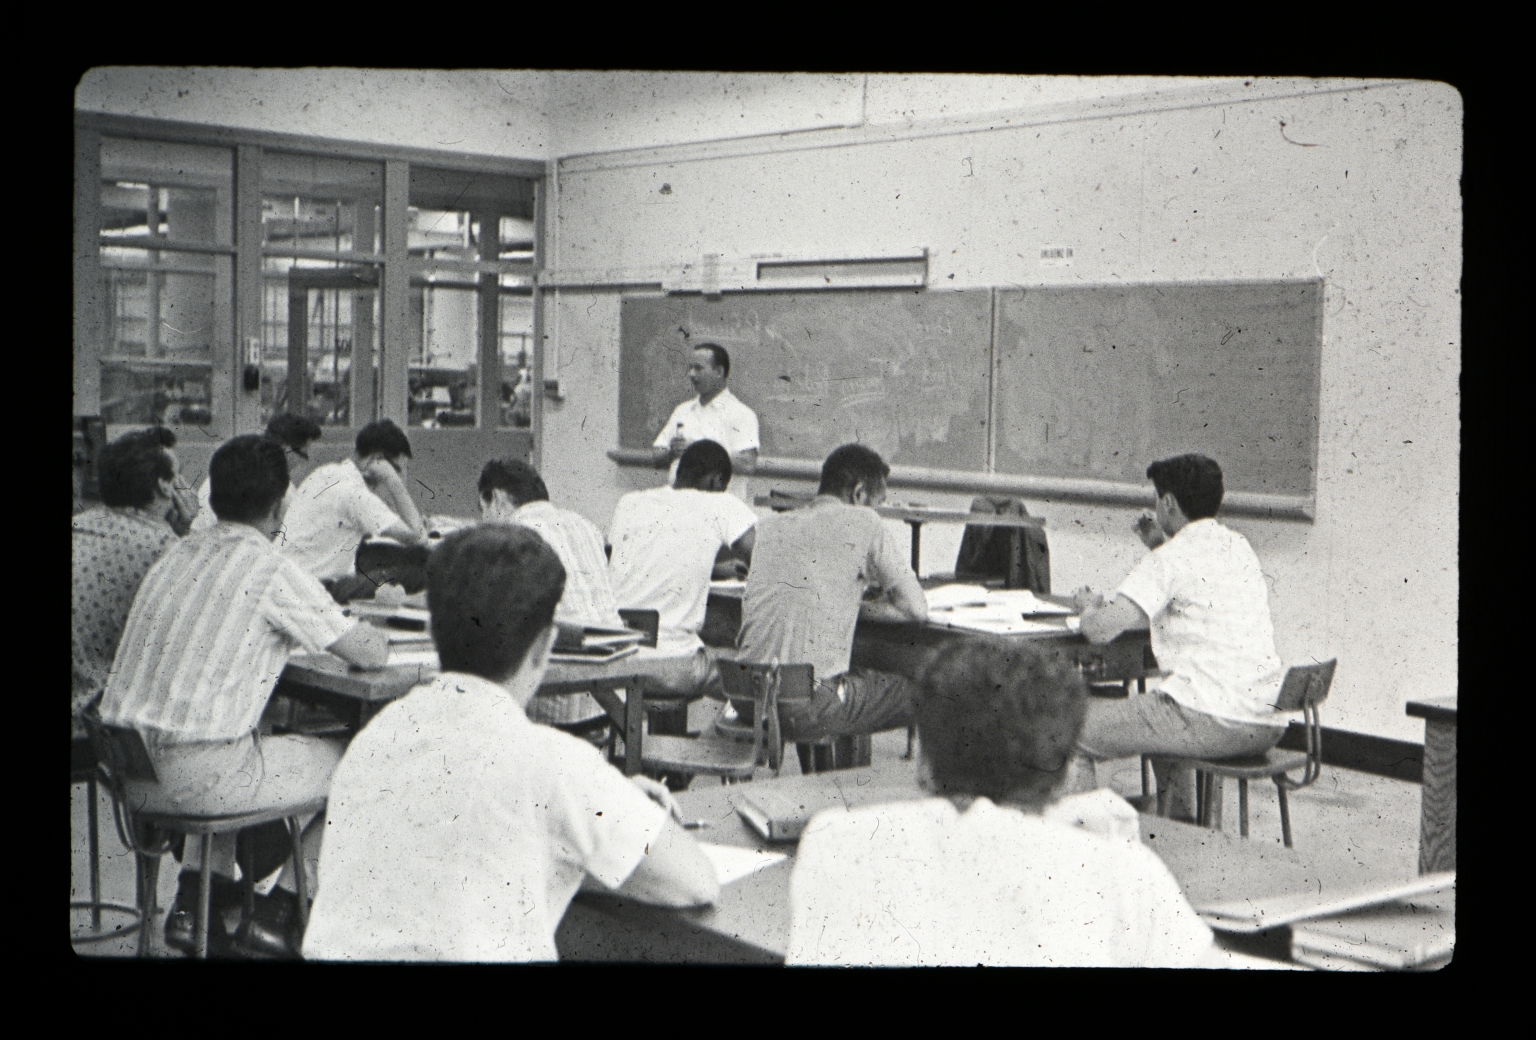 Downtown campus classroom